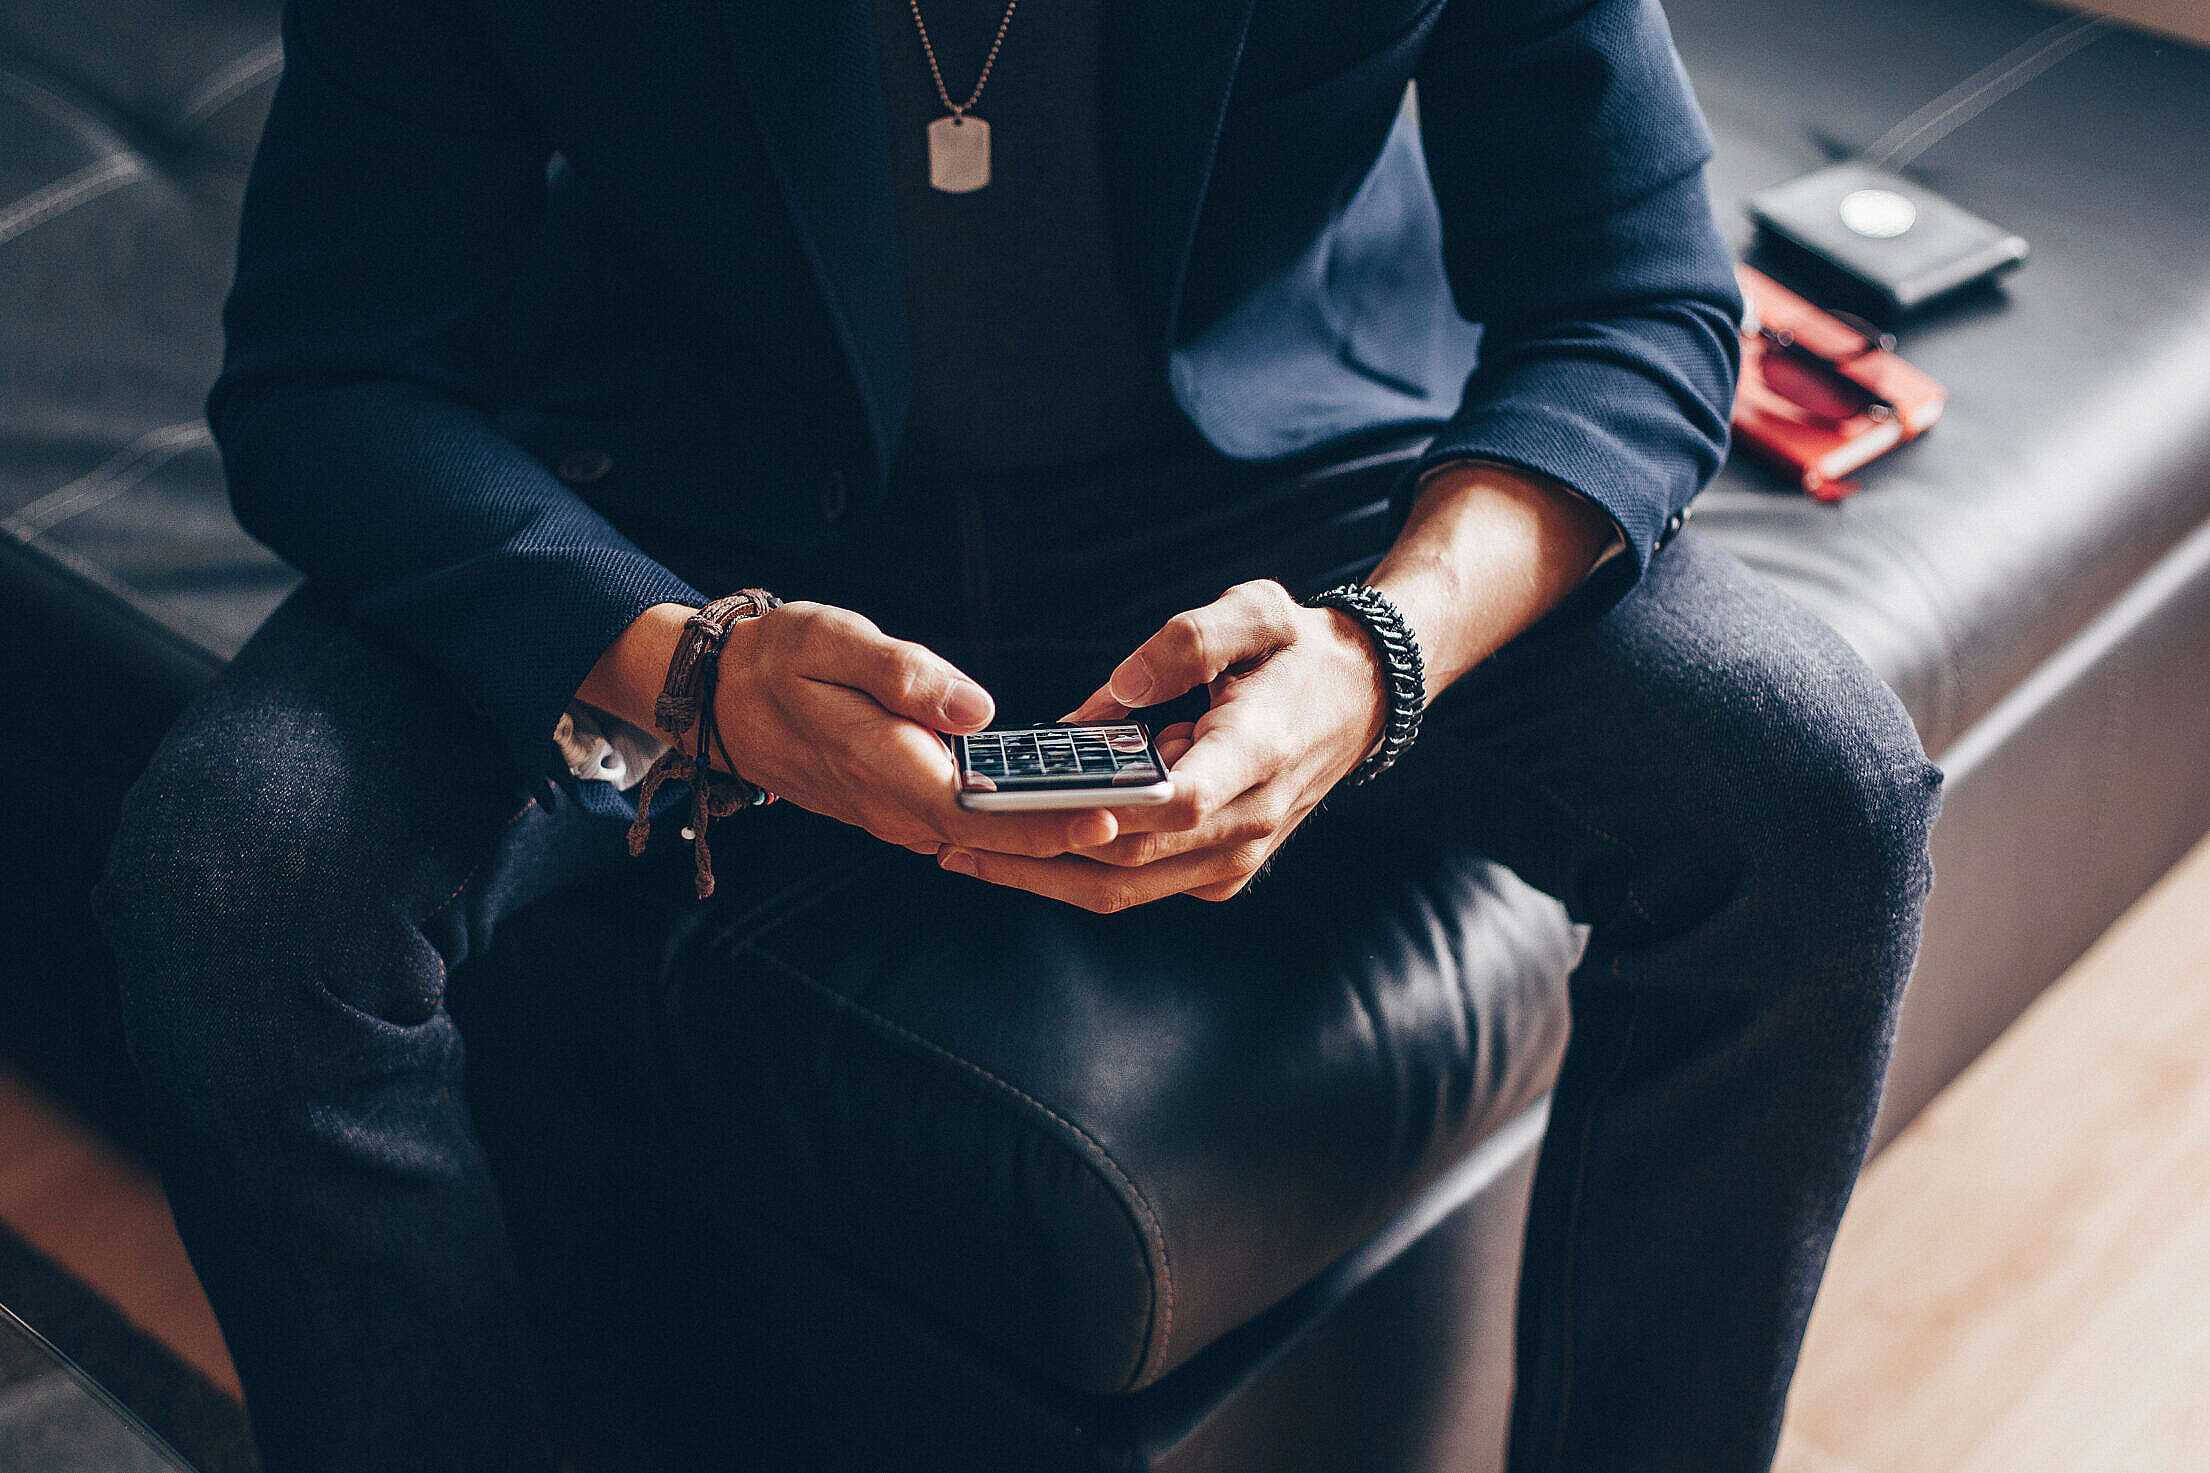 Man Using his iPhone 6 on a Sofa Free Stock Photo